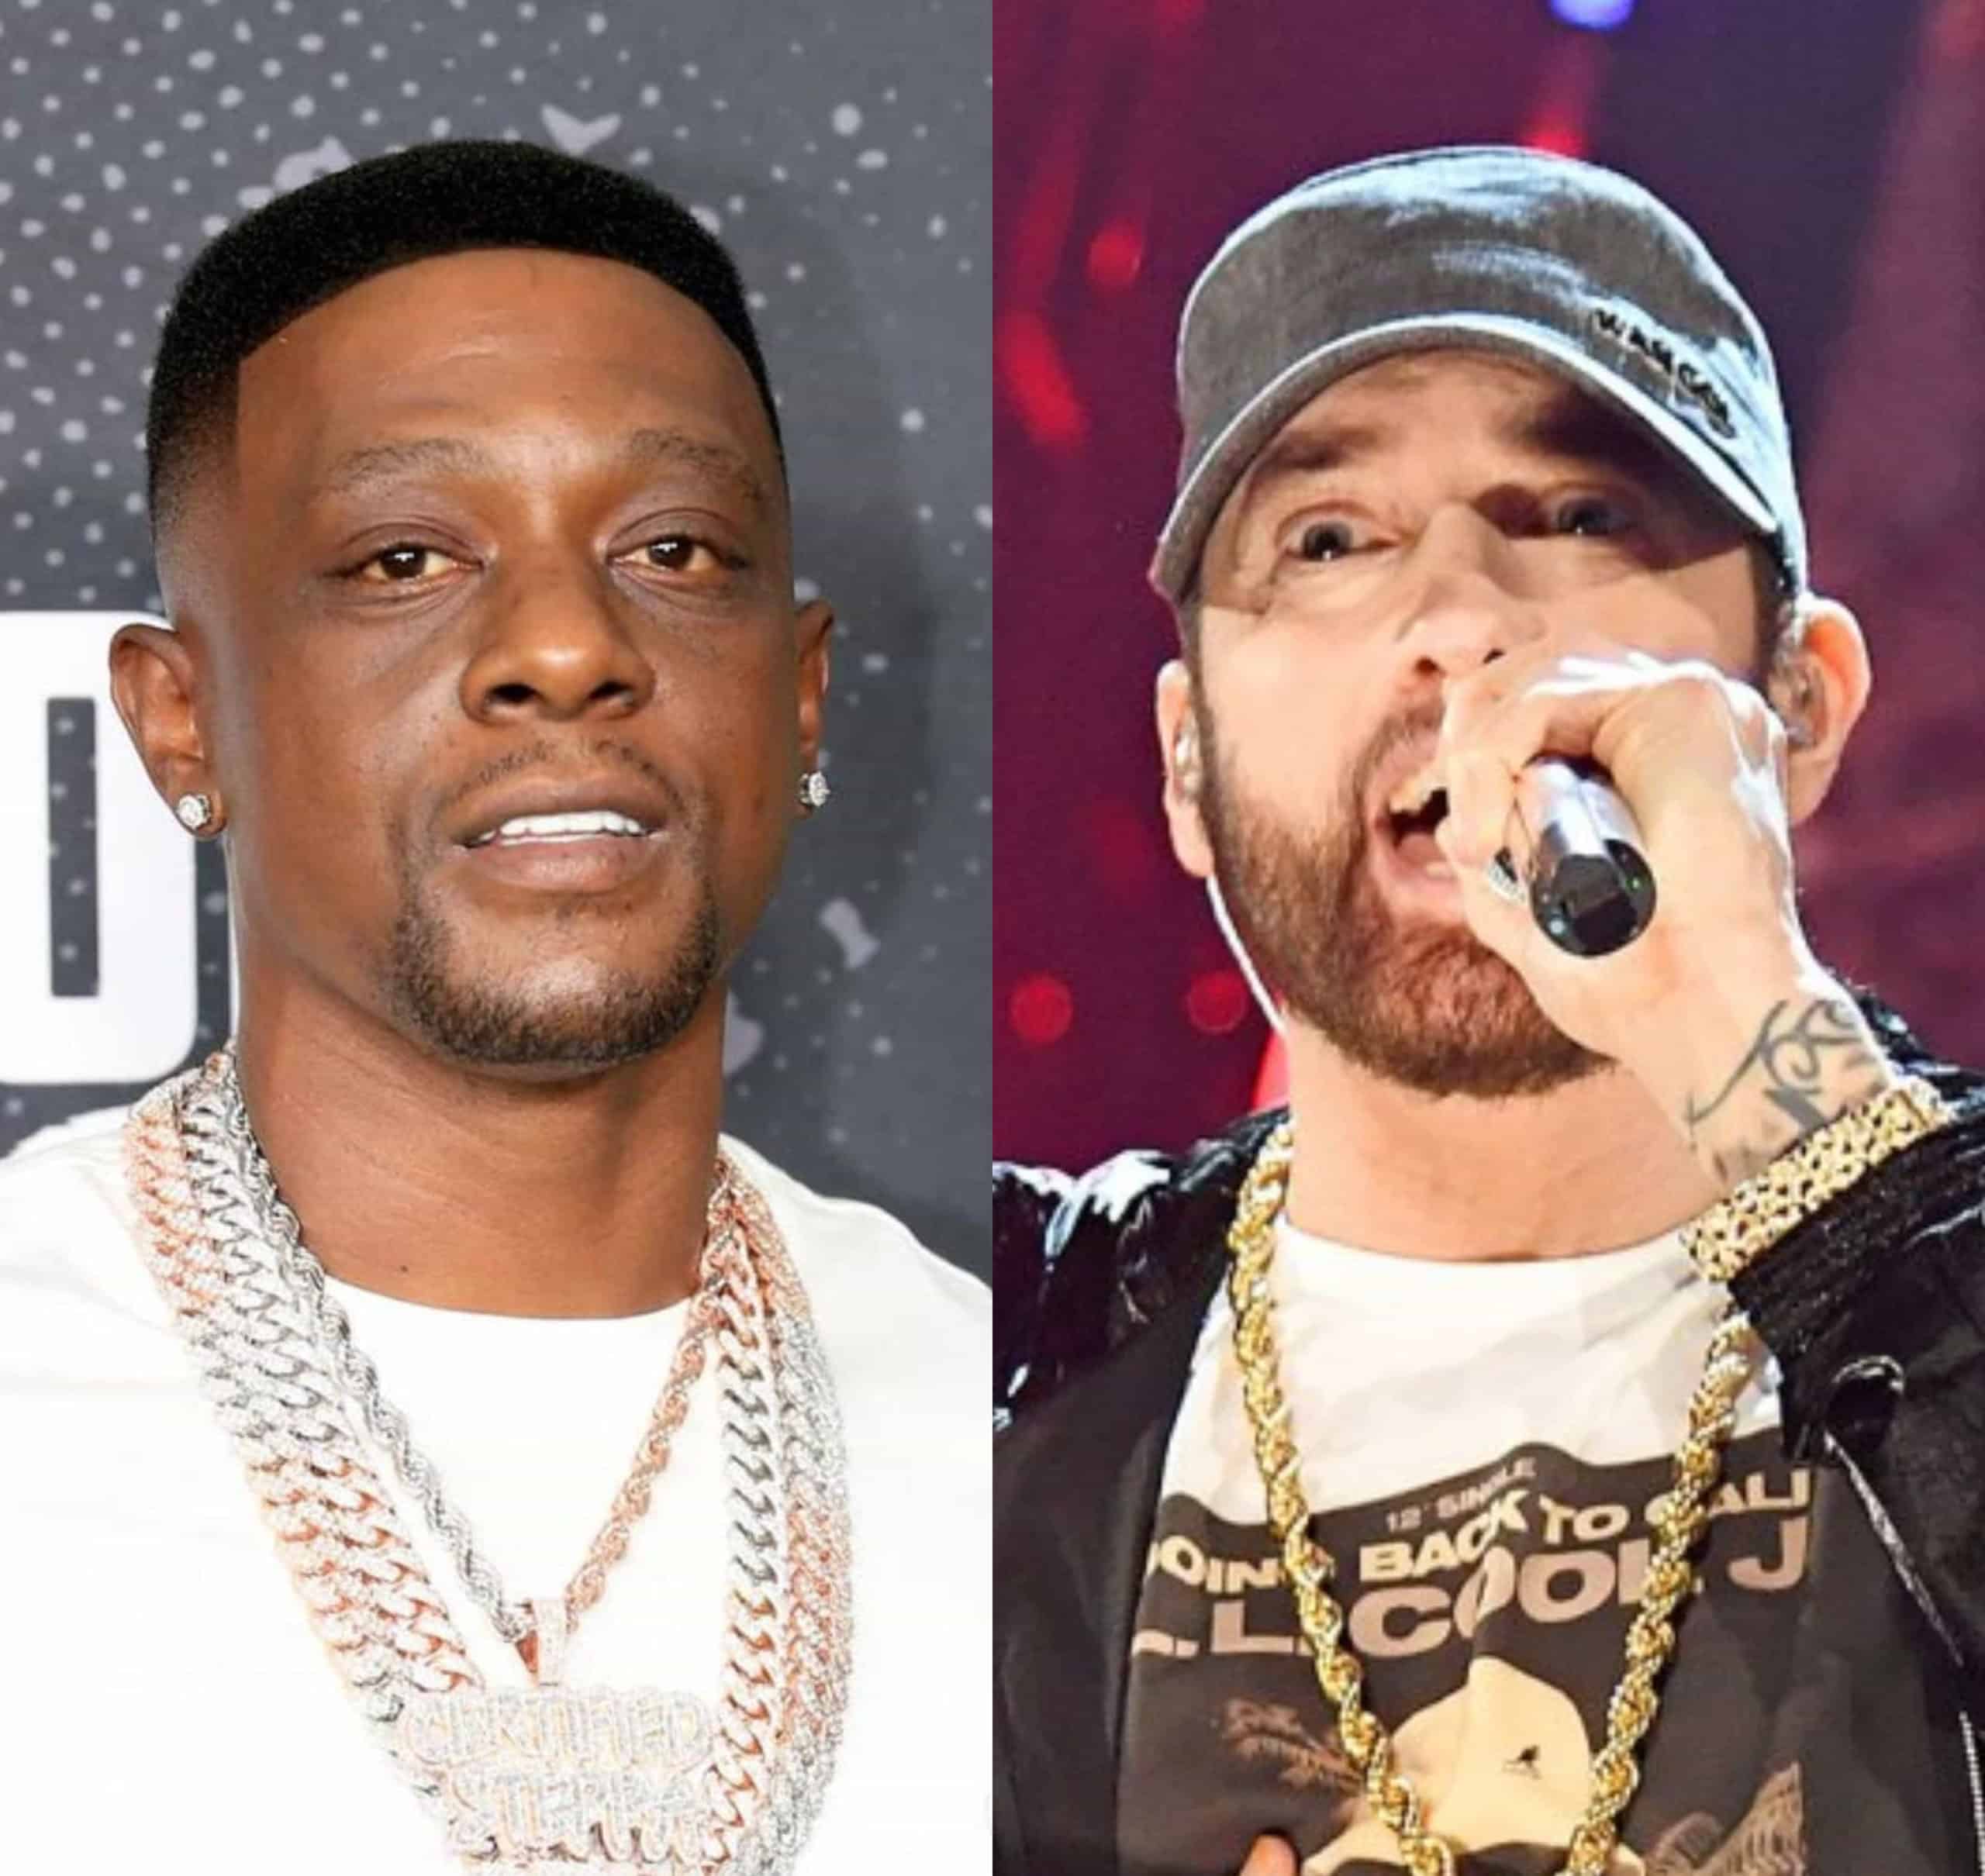 Boosie Badazz Praises Eminem For Taking A Knee At Super Bowl He's A Stand-Up Guy